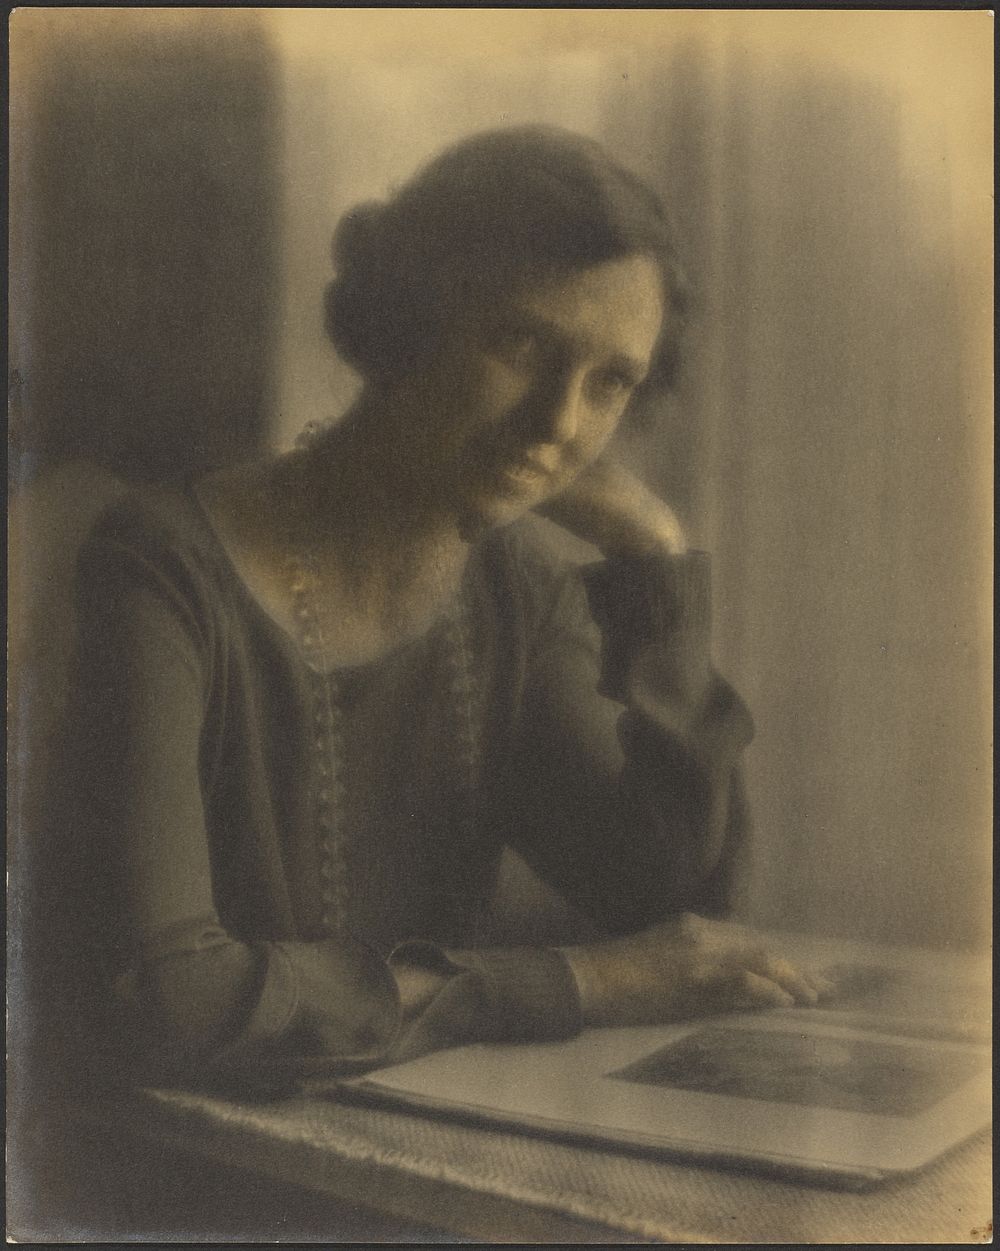 Portrait of a Woman with Long Necklace by Louis Fleckenstein